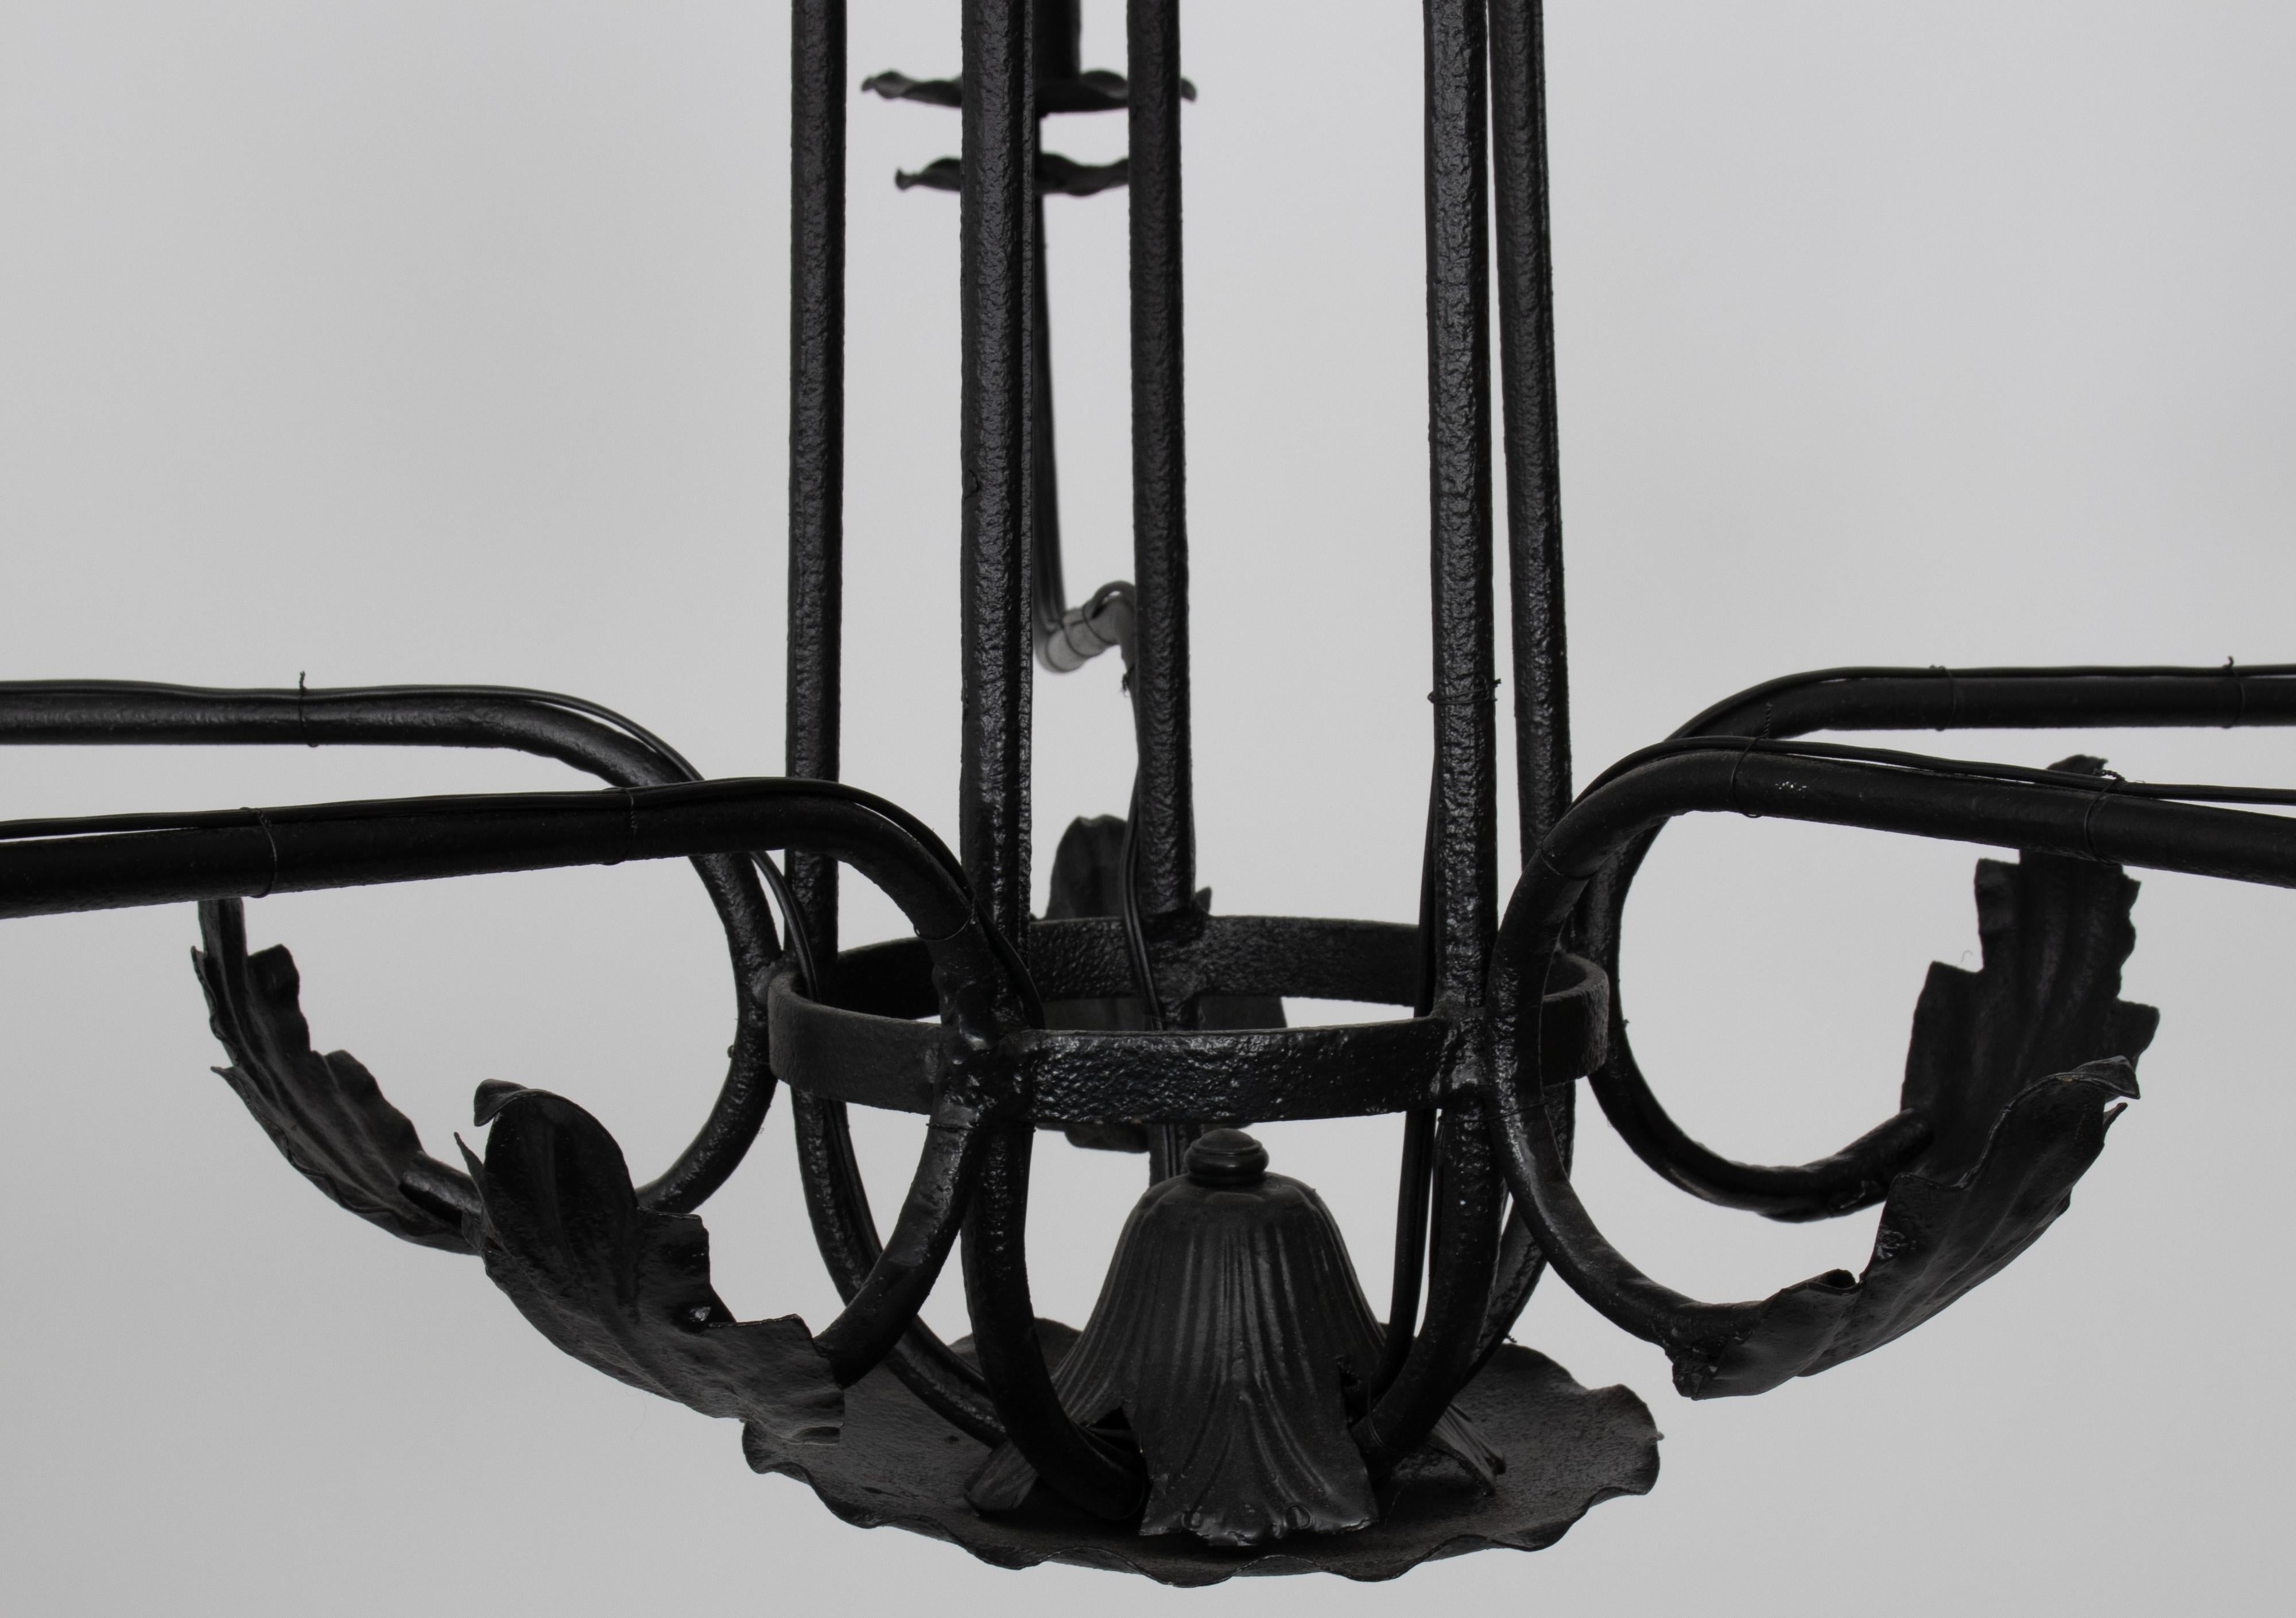 Large 1930s black wrought iron chandelier with leaf detailing. Newly painted in satin black finish. 12